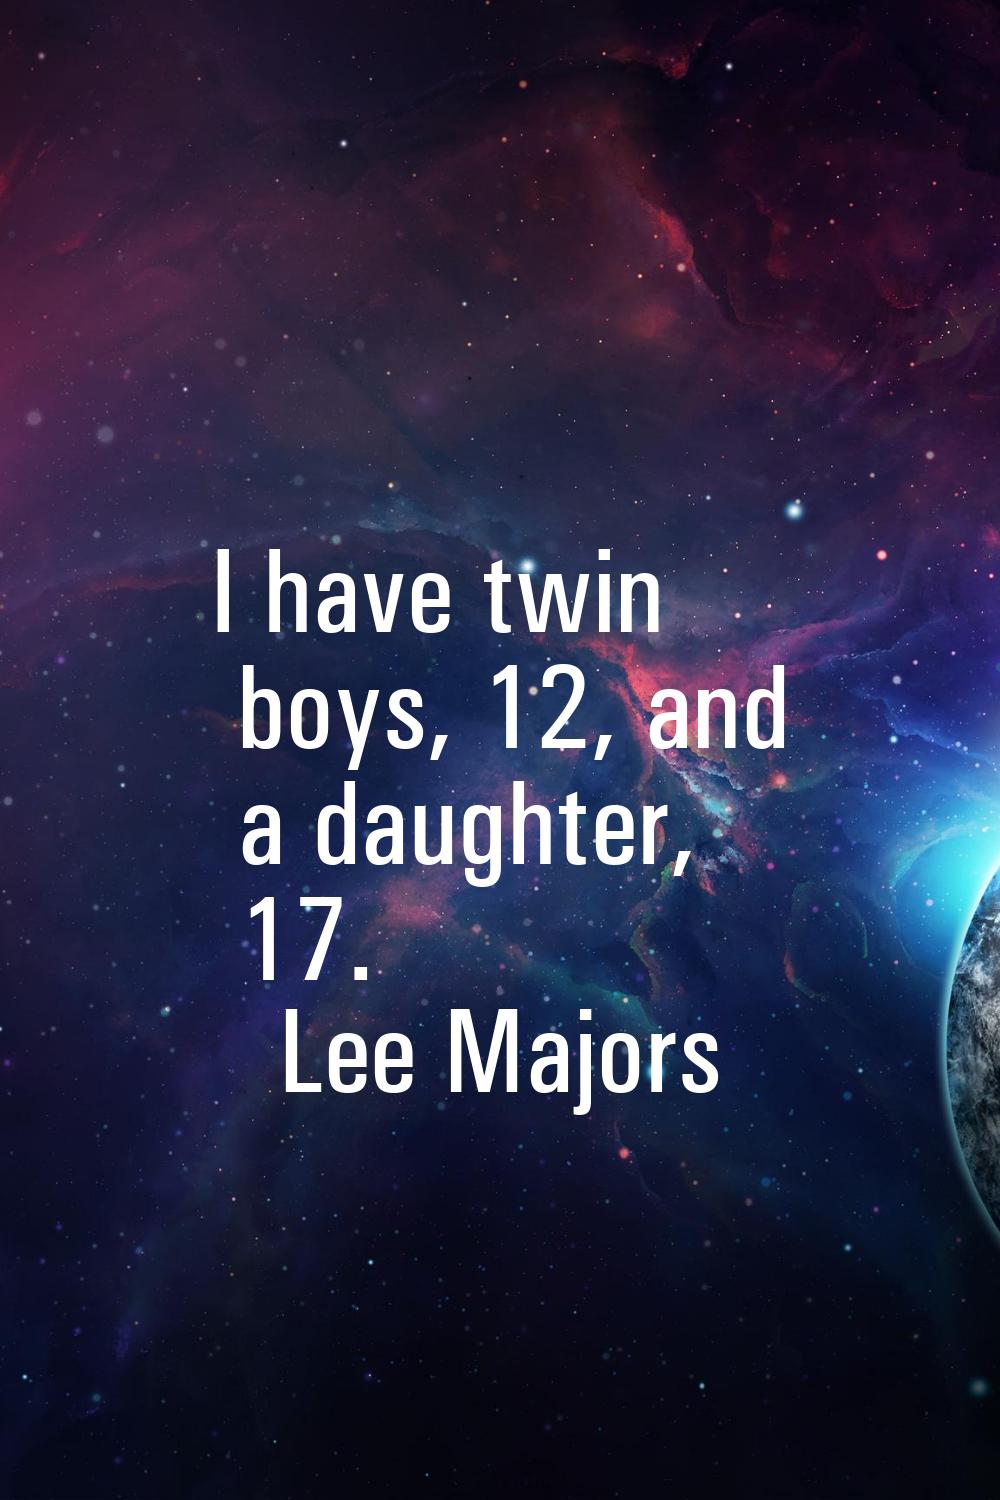 I have twin boys, 12, and a daughter, 17.